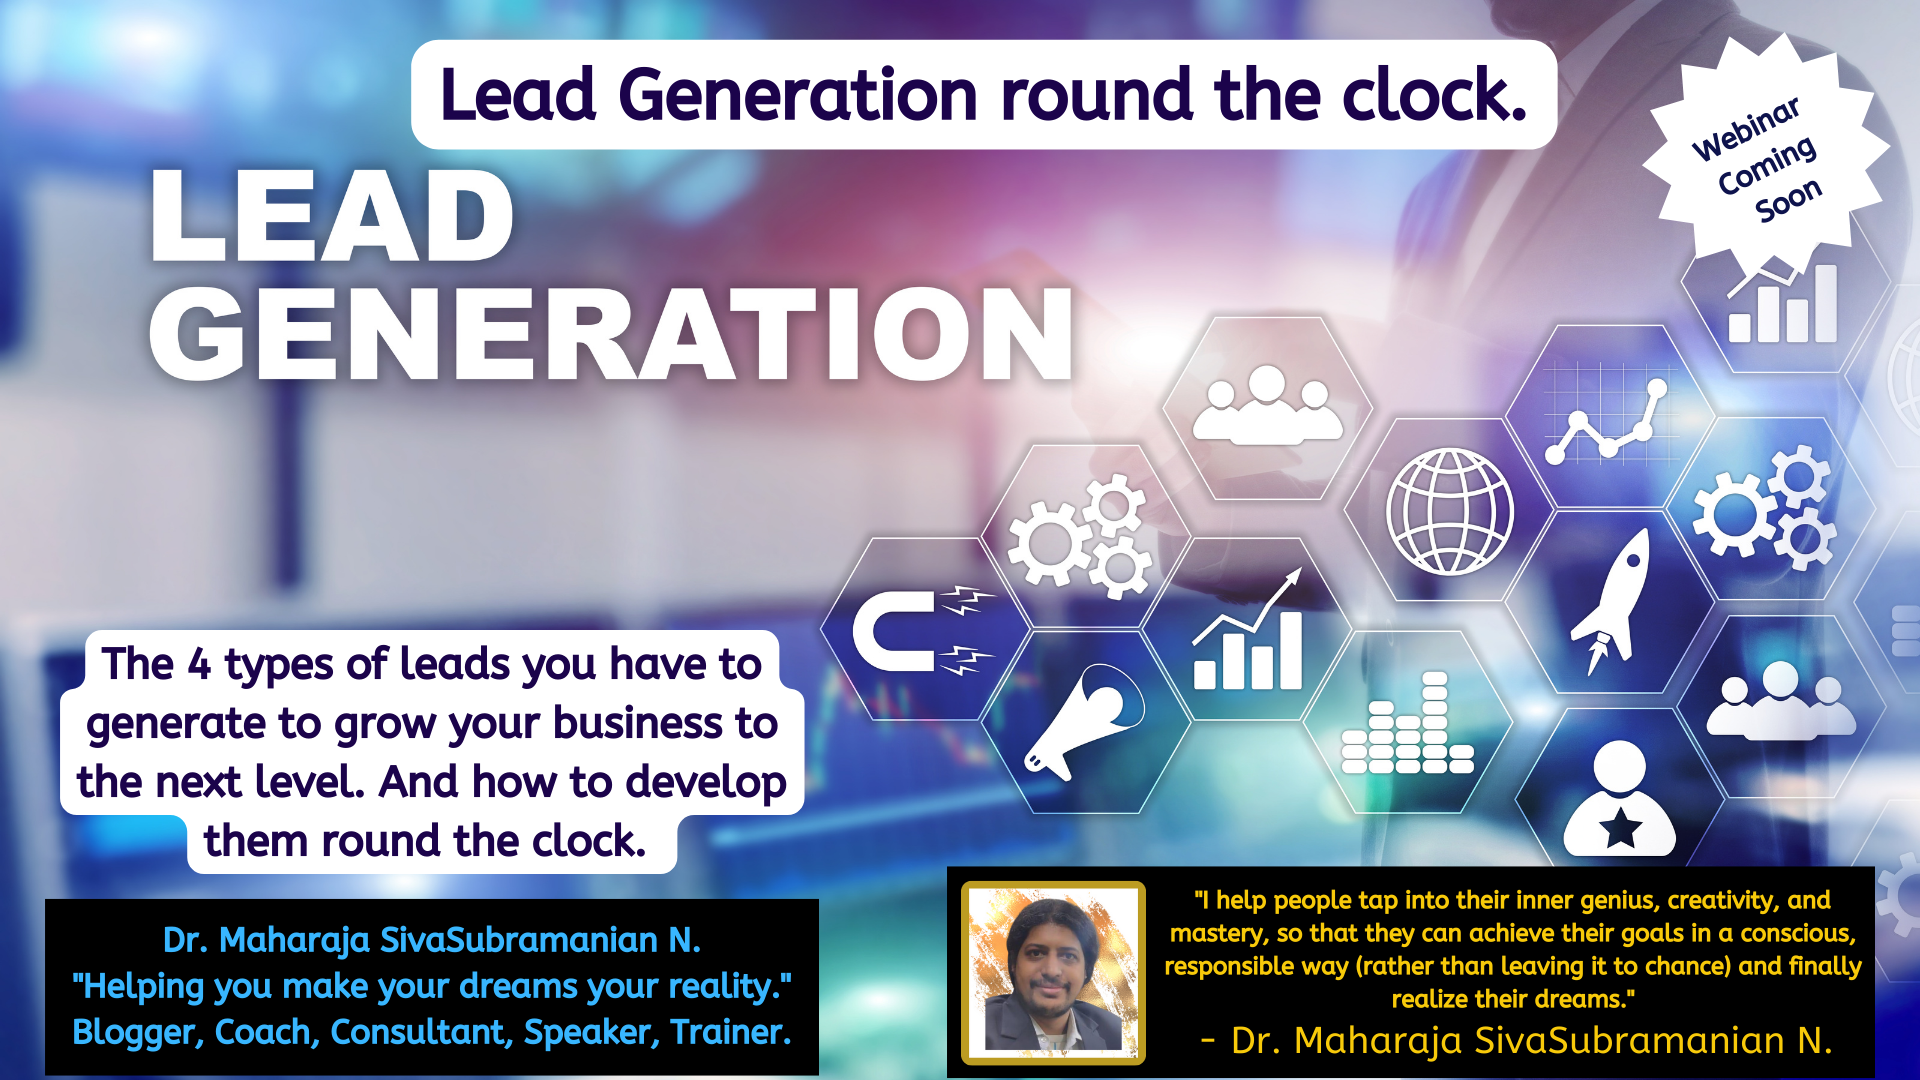 Lead Generation round the clock for Business Coaches. – Upcoming free webinar.